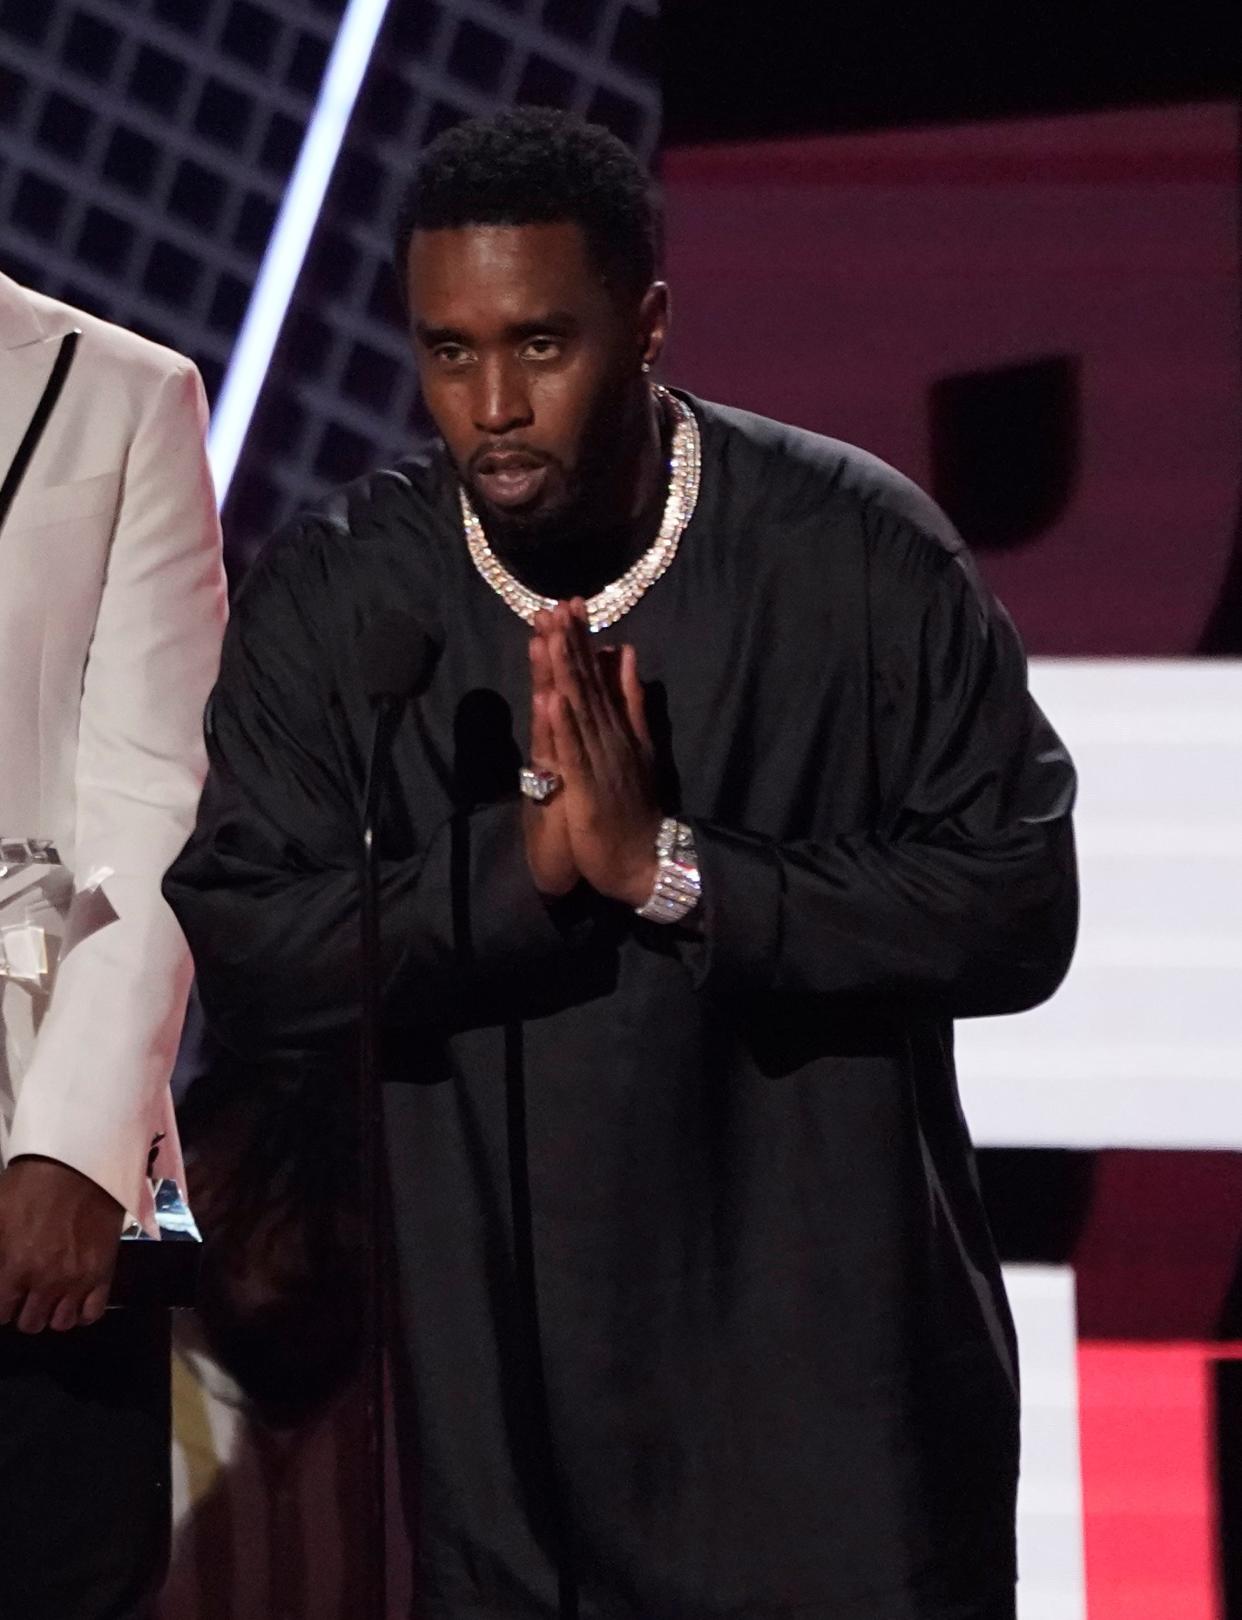 Sean "Diddy" Combs, pictured accepting the lifetime achievement award at the BET Awards on June 26, 2022, is responding to a lawsuit claiming that he gang raped a 17-year-old girl in 2003.